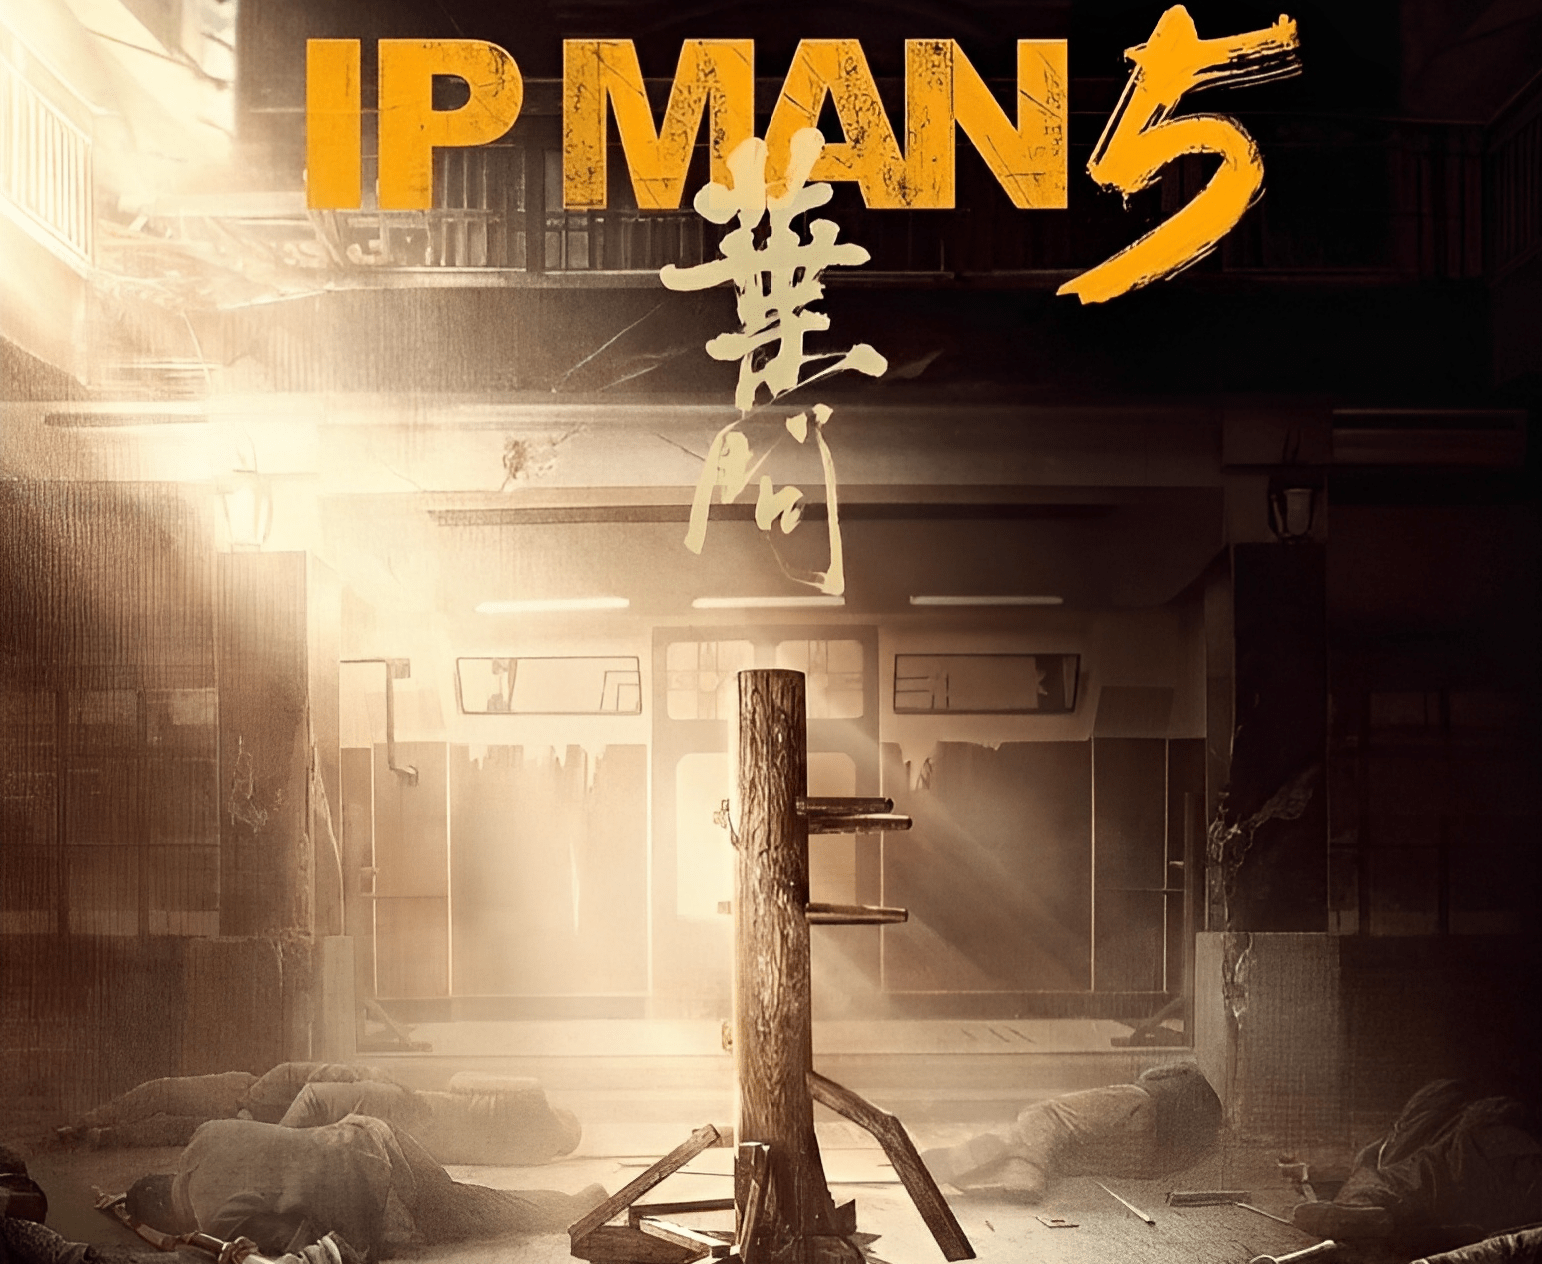 Official poster for Ip Man 5